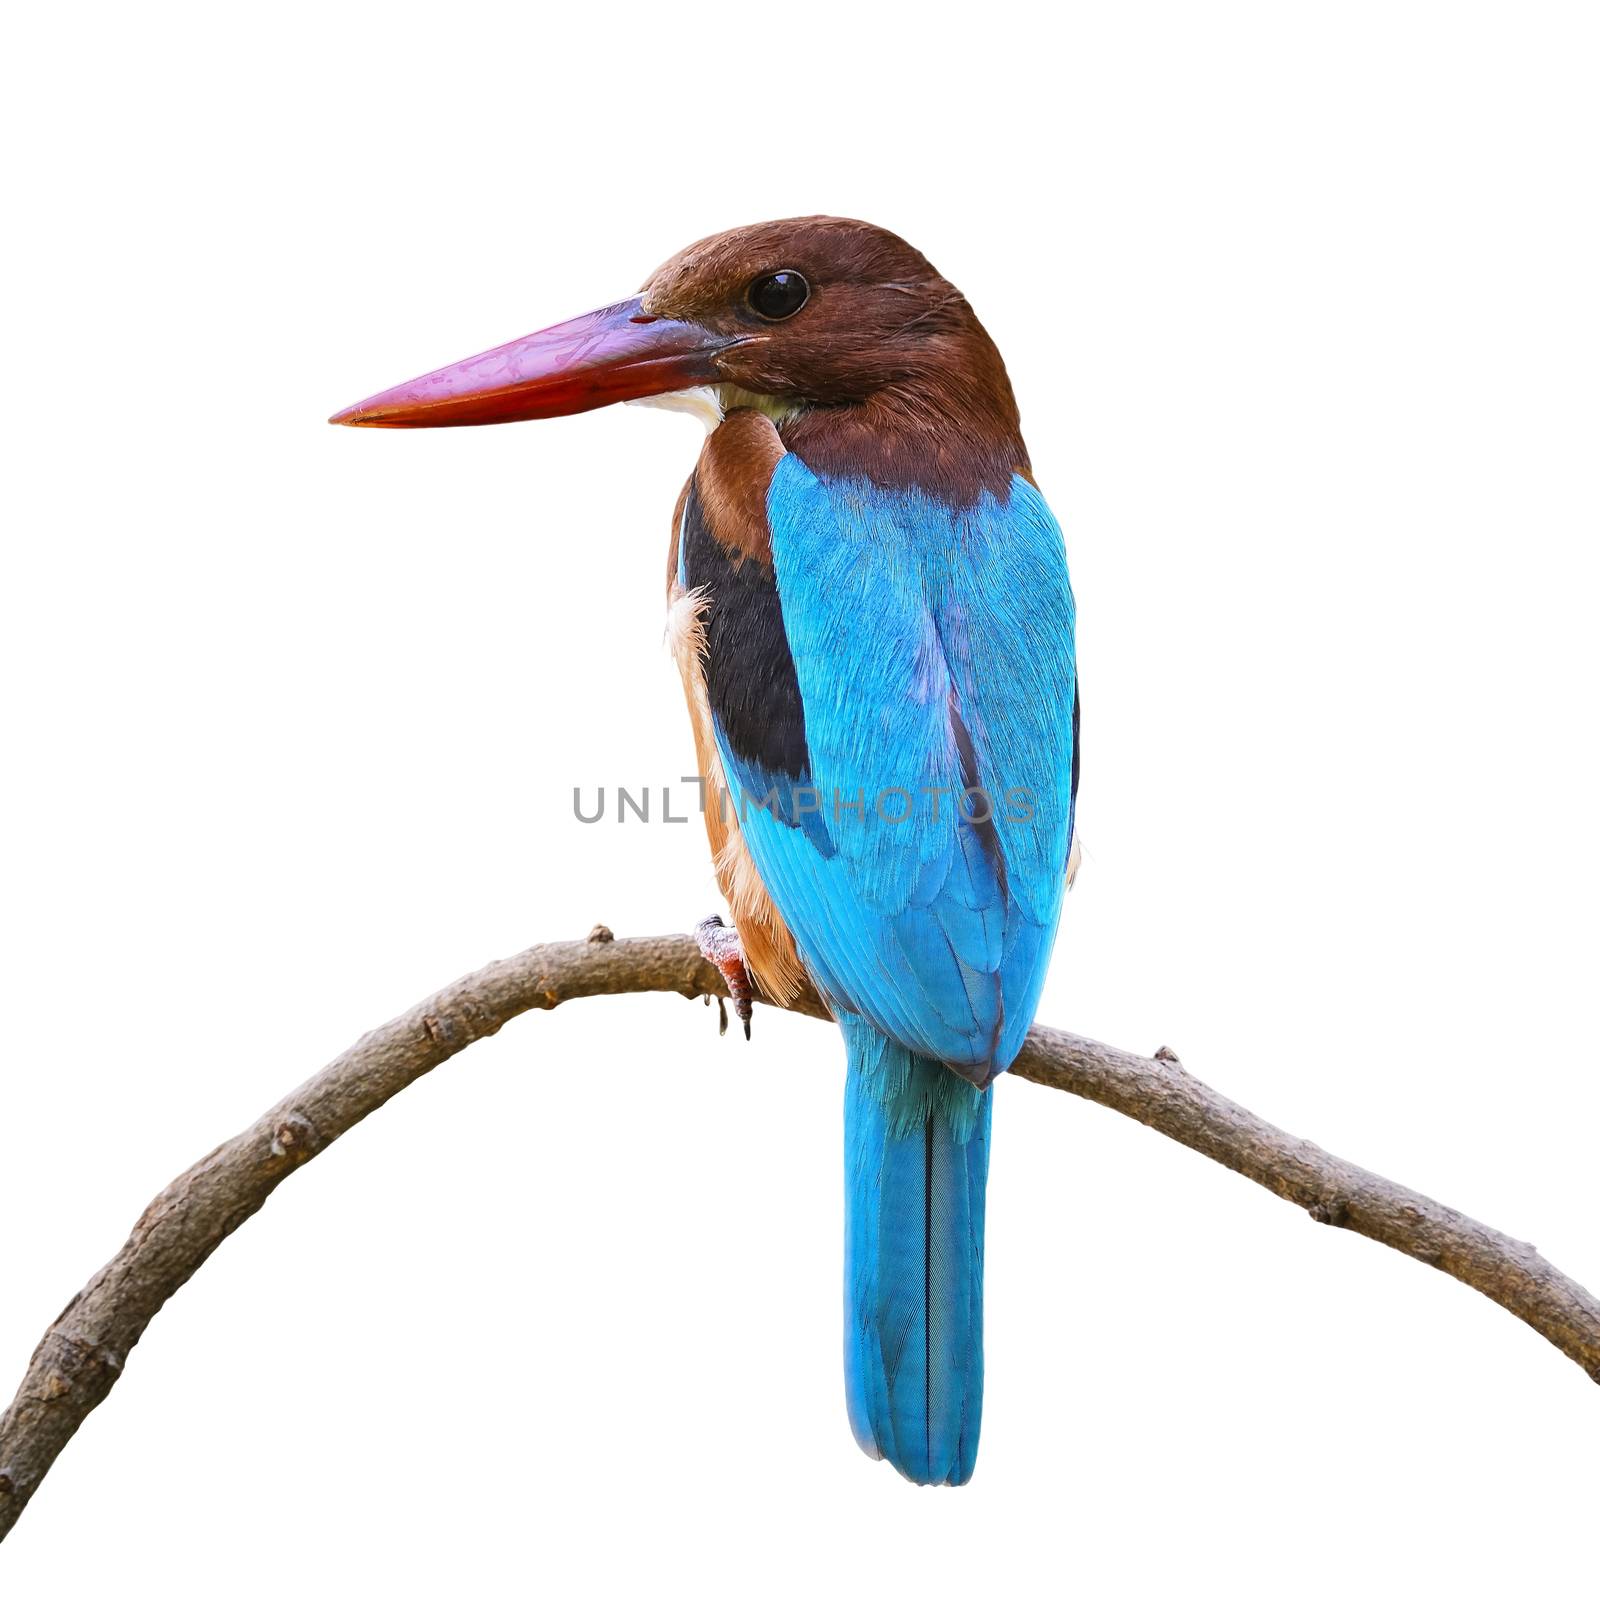 Beautiful Kingfisher blue bird, White-throated Kingfisher (Halcyon smyrnensis), standing on a branch, isolated on white background